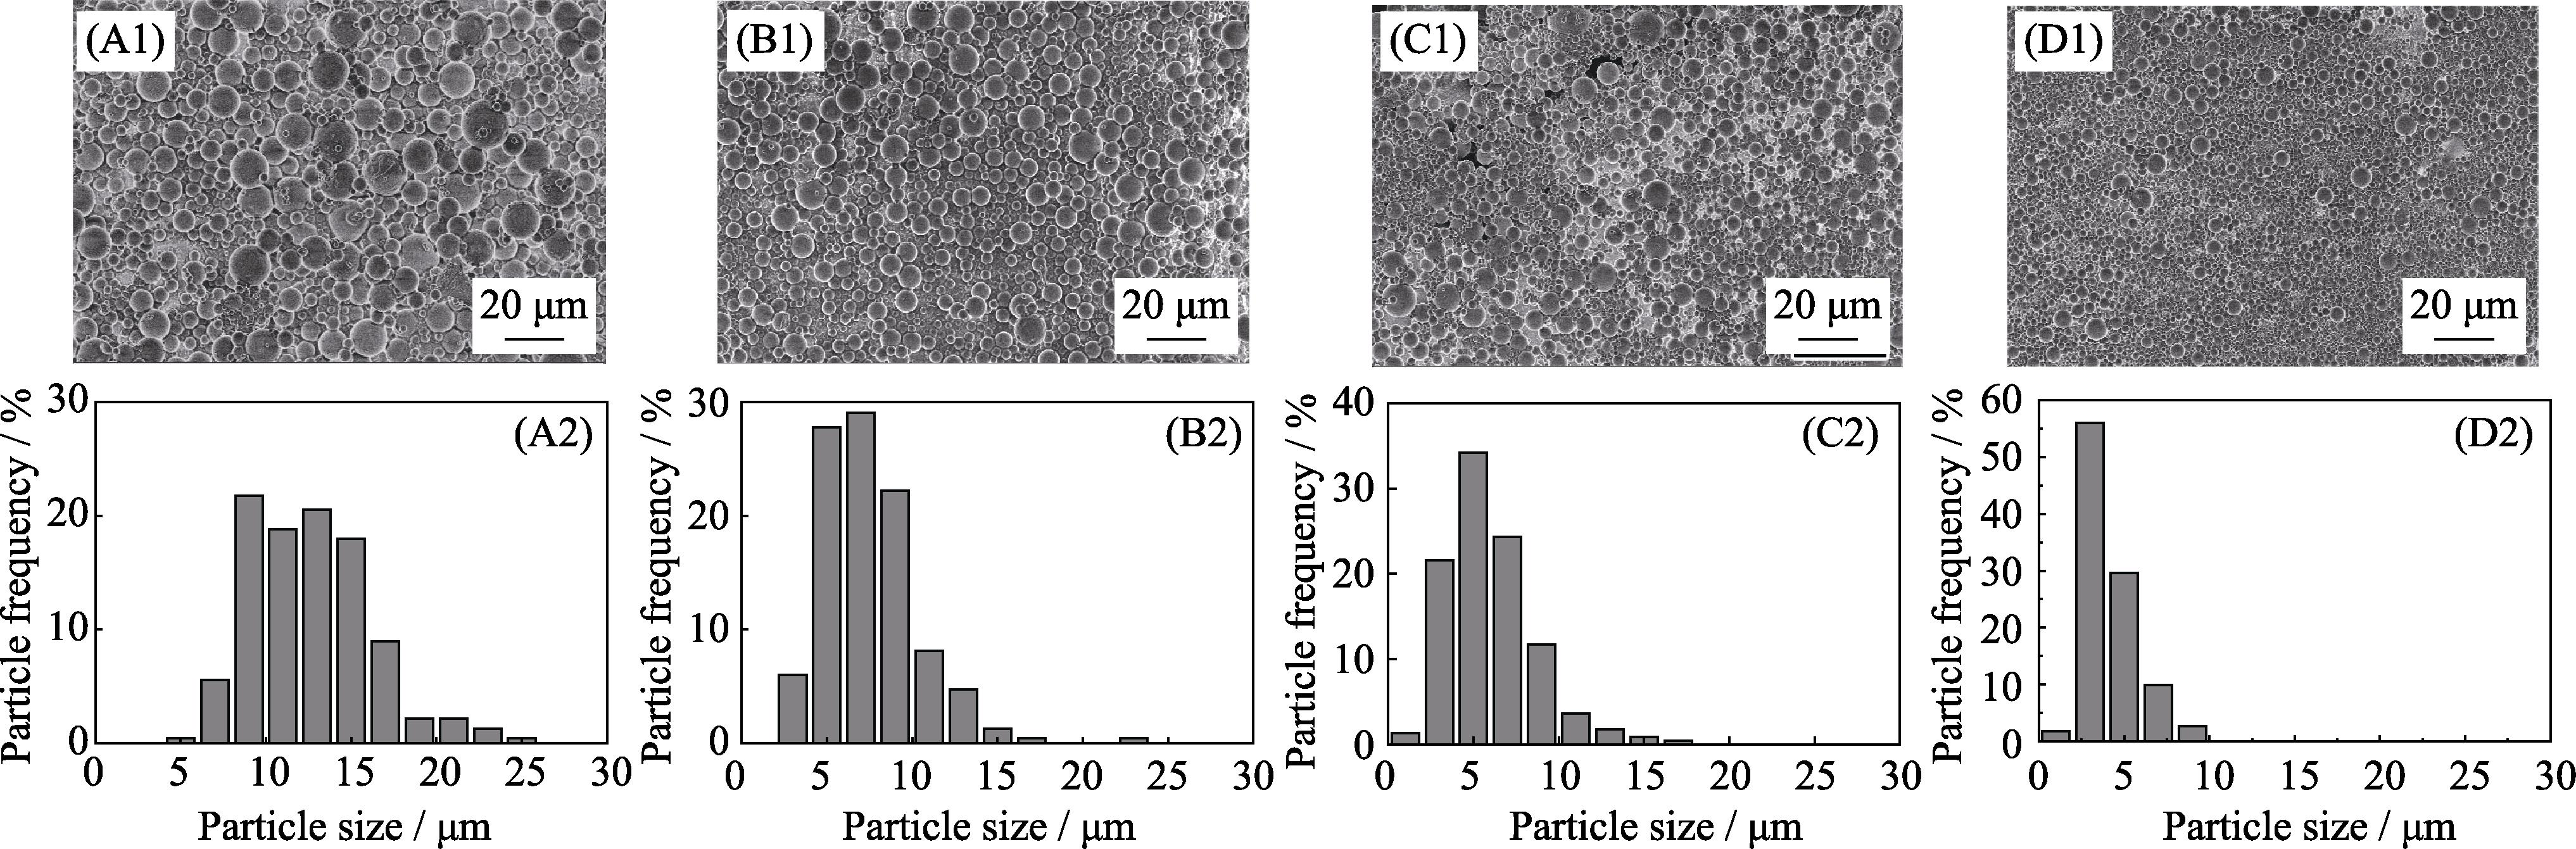 SEM images and the particle size histogramms obtained by Imaje J statistics of 77SBG microspheres prepared with 5wt% precursor solution at inlet air volume of 283 (A1, A2), 439 (B1, B2), 667 (C1, C2) and 1052 L/h(D1, D2) when the feed rate was 6 mL/min